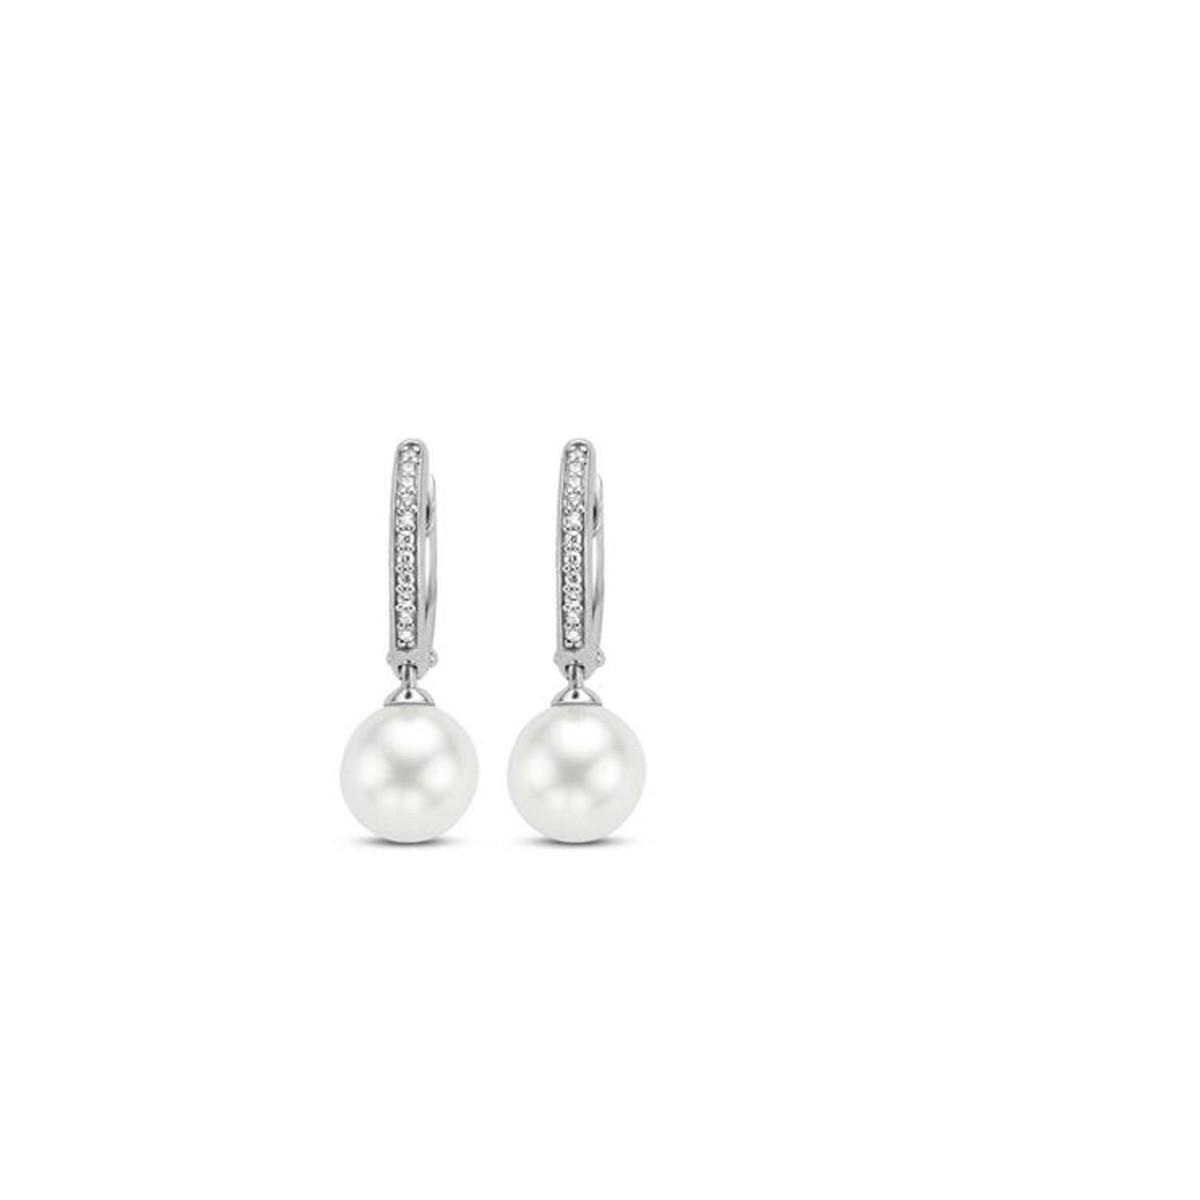 RHODIUM PLATED SILVER AND PEARL EARRINGS TI SENTO 7696PW